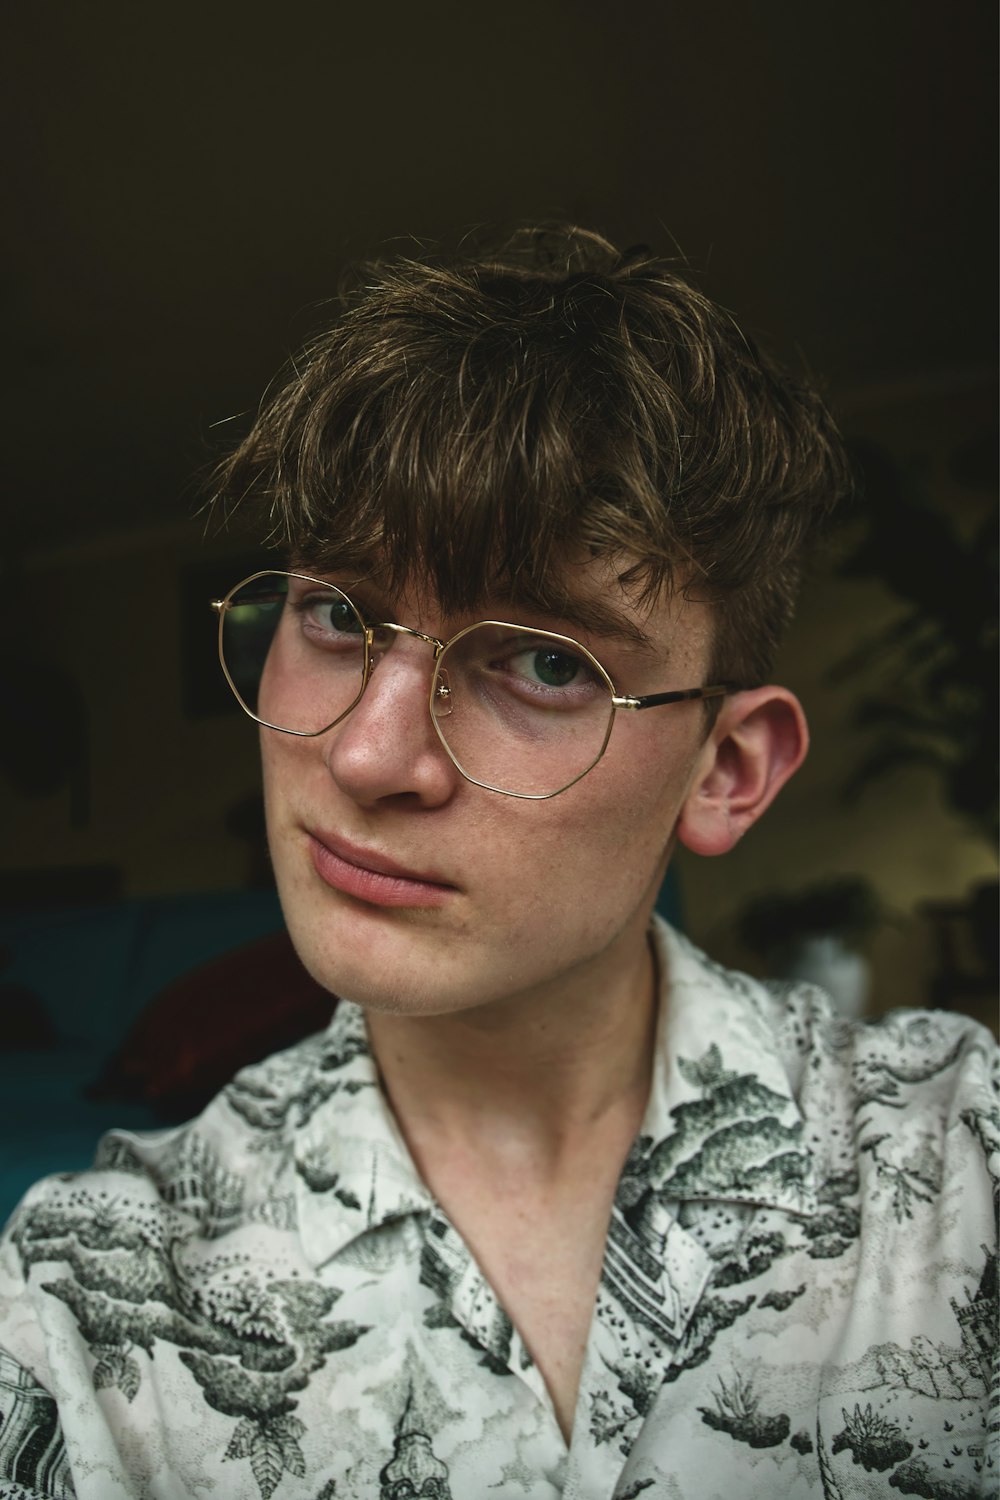 man in gray and white floral button up shirt wearing eyeglasses